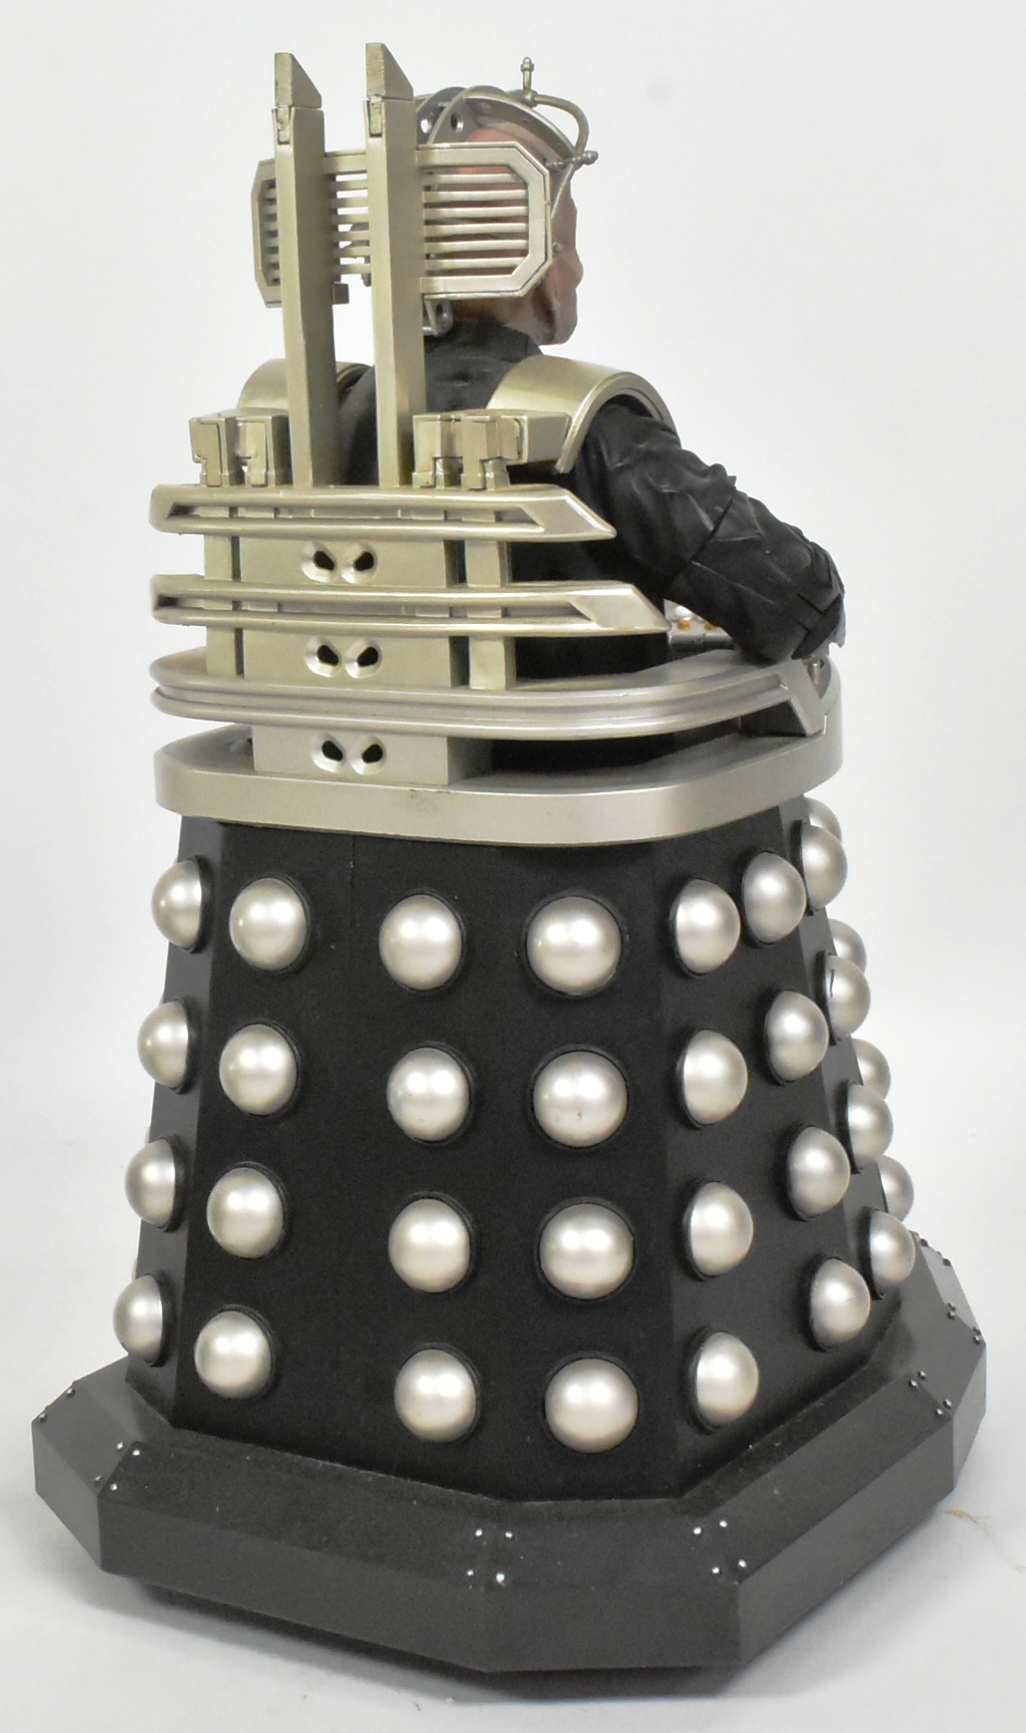 DOCTOR WHO - CHARACTER OPTIONS - RADIO CONTROLLED DAVROS - Image 4 of 6